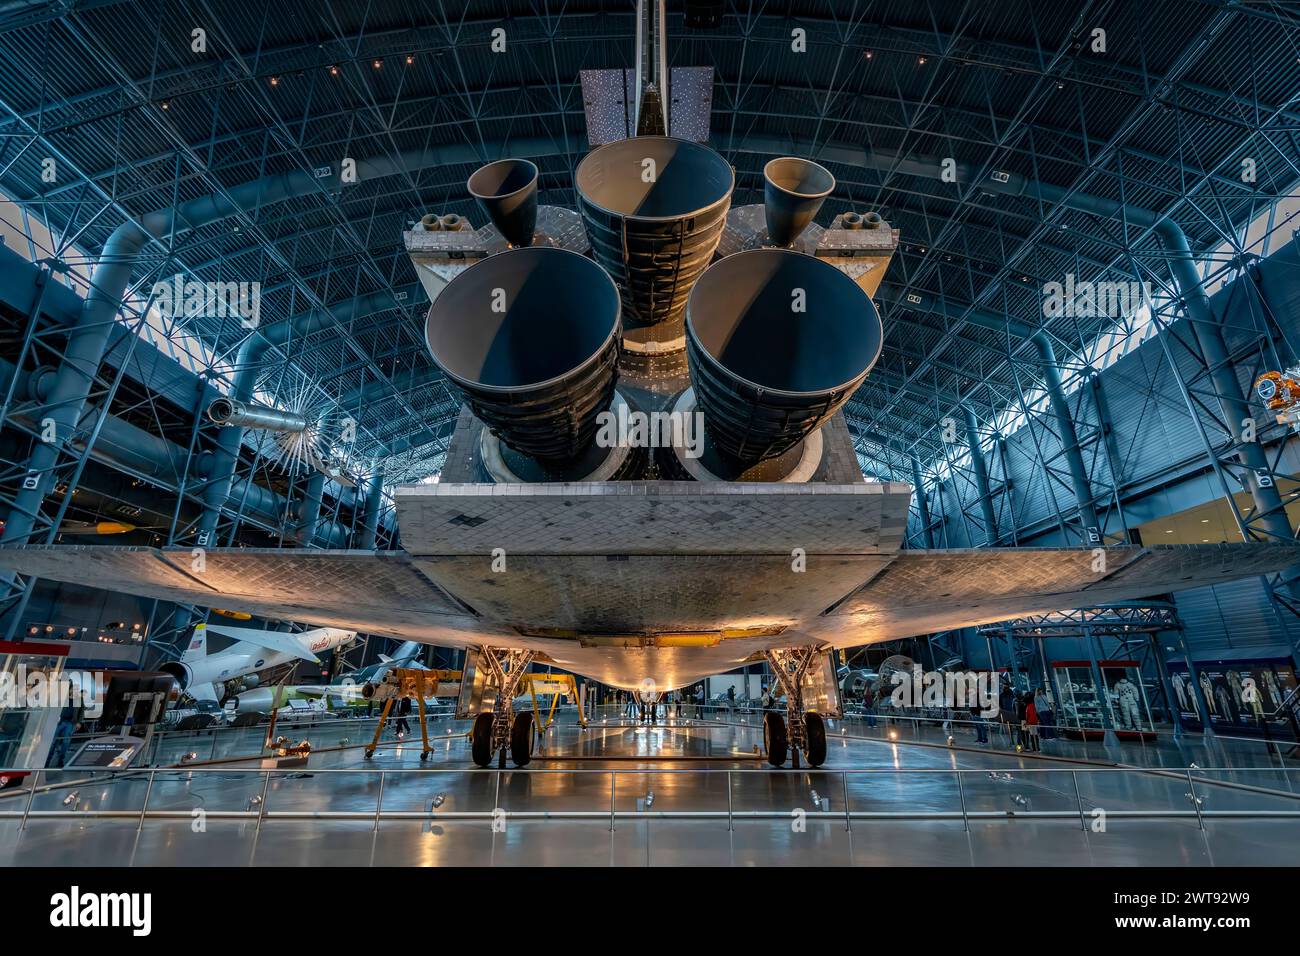 Vista dello Space Shuttle Discovery, situato nel James S. McDonnell Space Hangar nel Steven F. Udvar-Hazy Center, National Air and Space Museum. Foto Stock